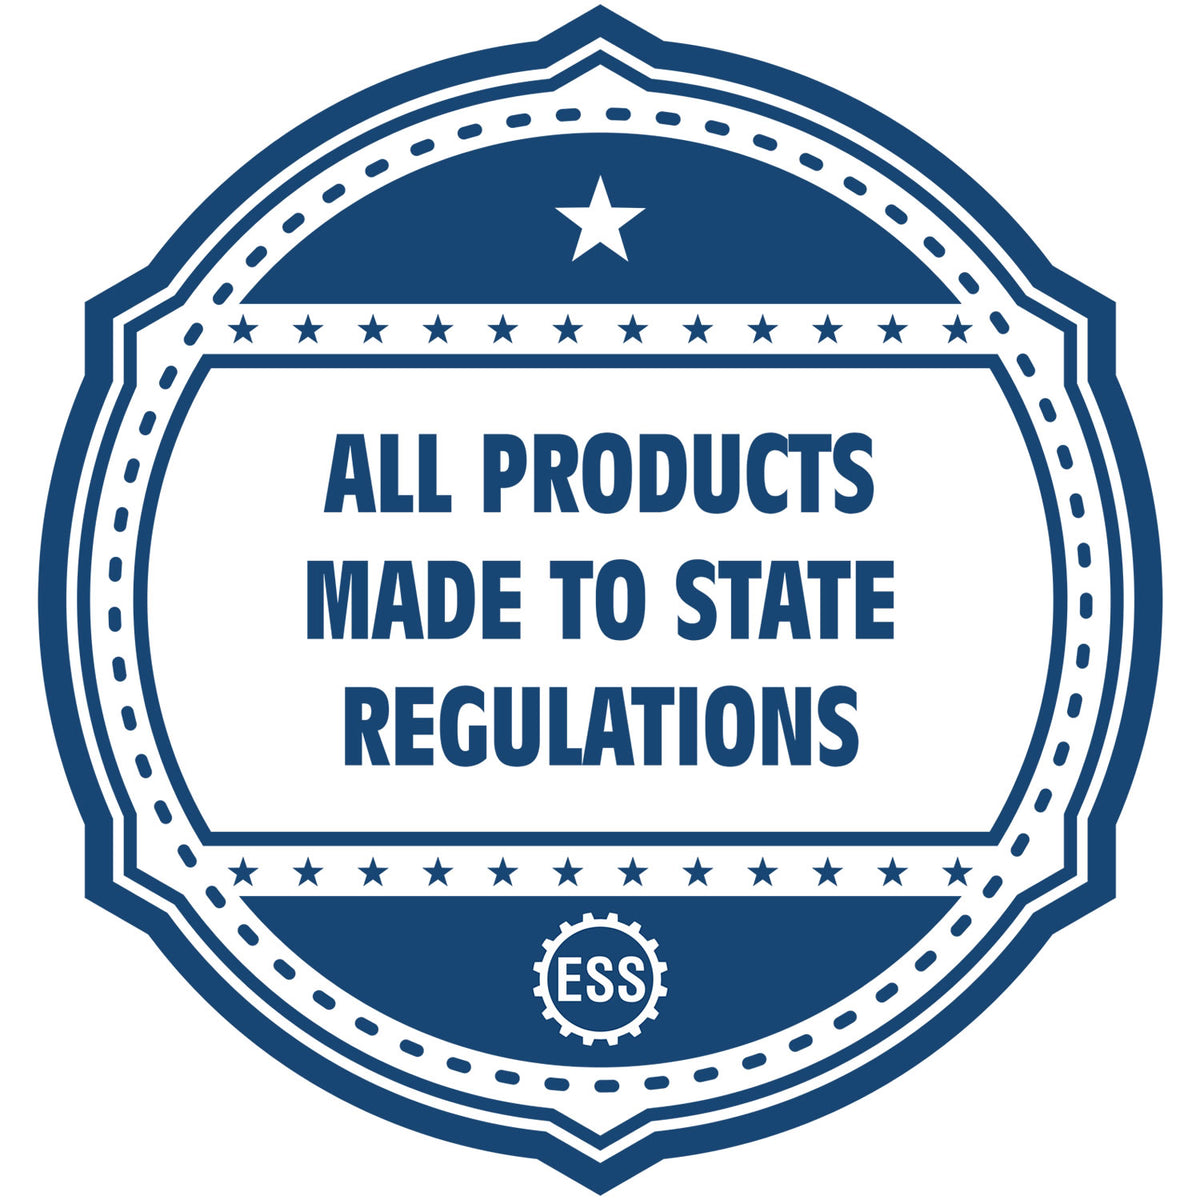 An icon or badge element for the Soft Florida Professional Engineer Seal showing that this product is made in compliance with state regulations.